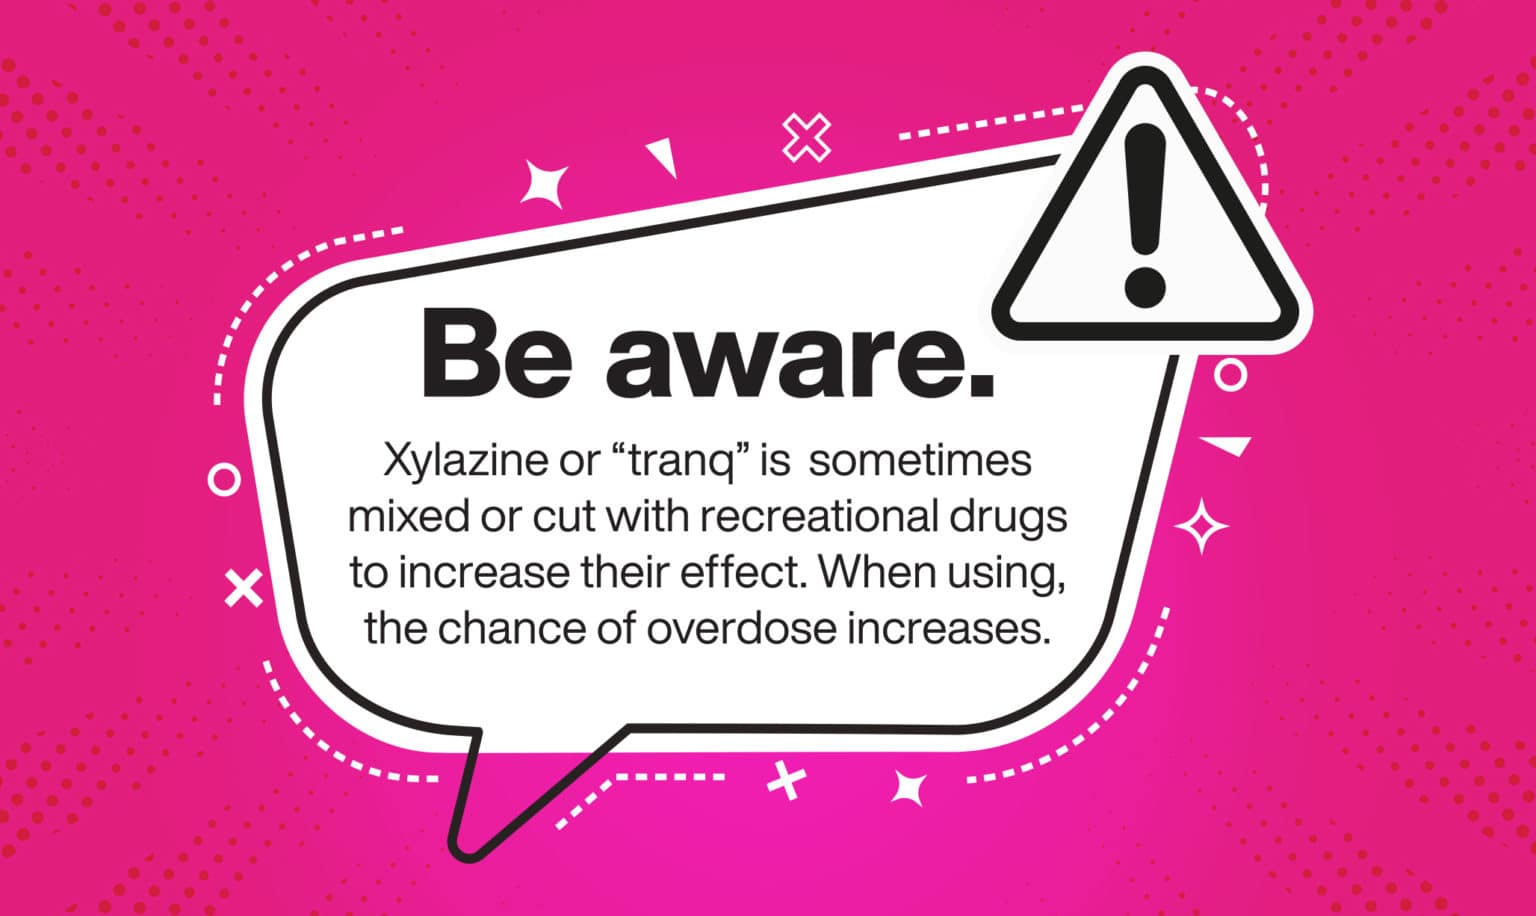 Be aware. Xylazine or "tranq" is sometimes mixed or cut with recreational drugs to increase their effect. When using, the change of overdose increases.